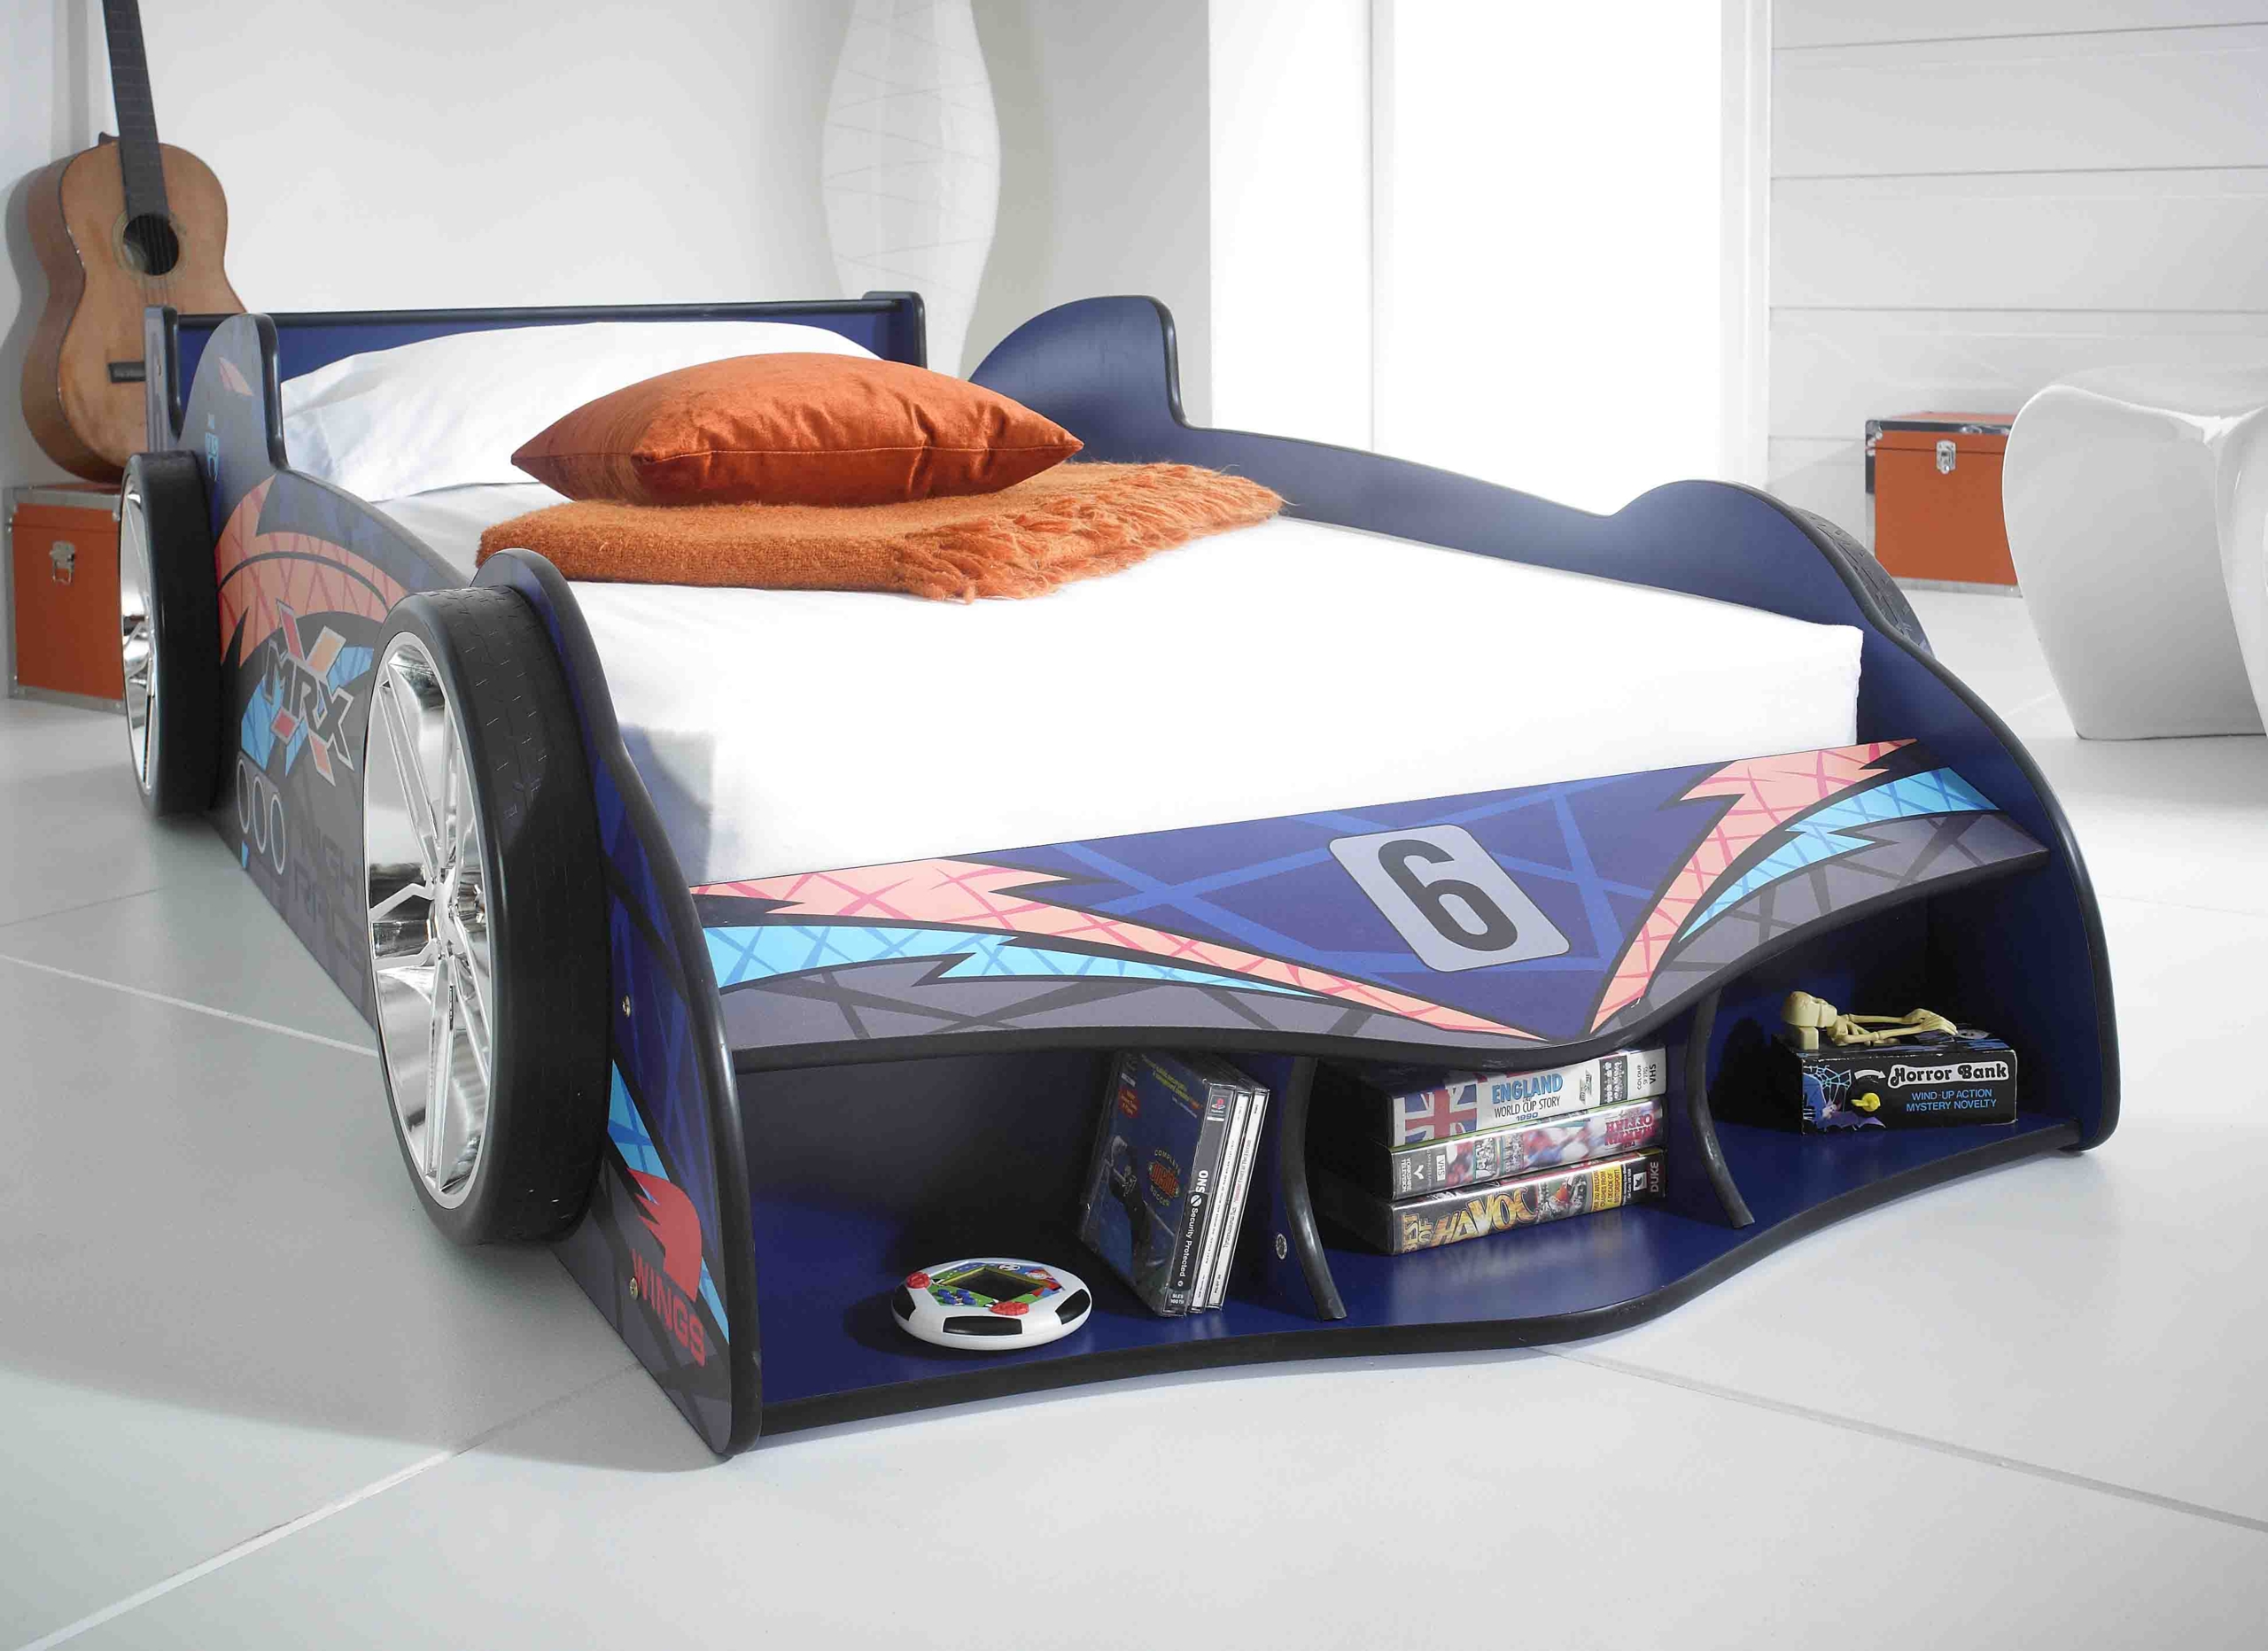 160x80cm Racing Car Childrens Bed with mattress 4 Kids bedding & duvet cover 